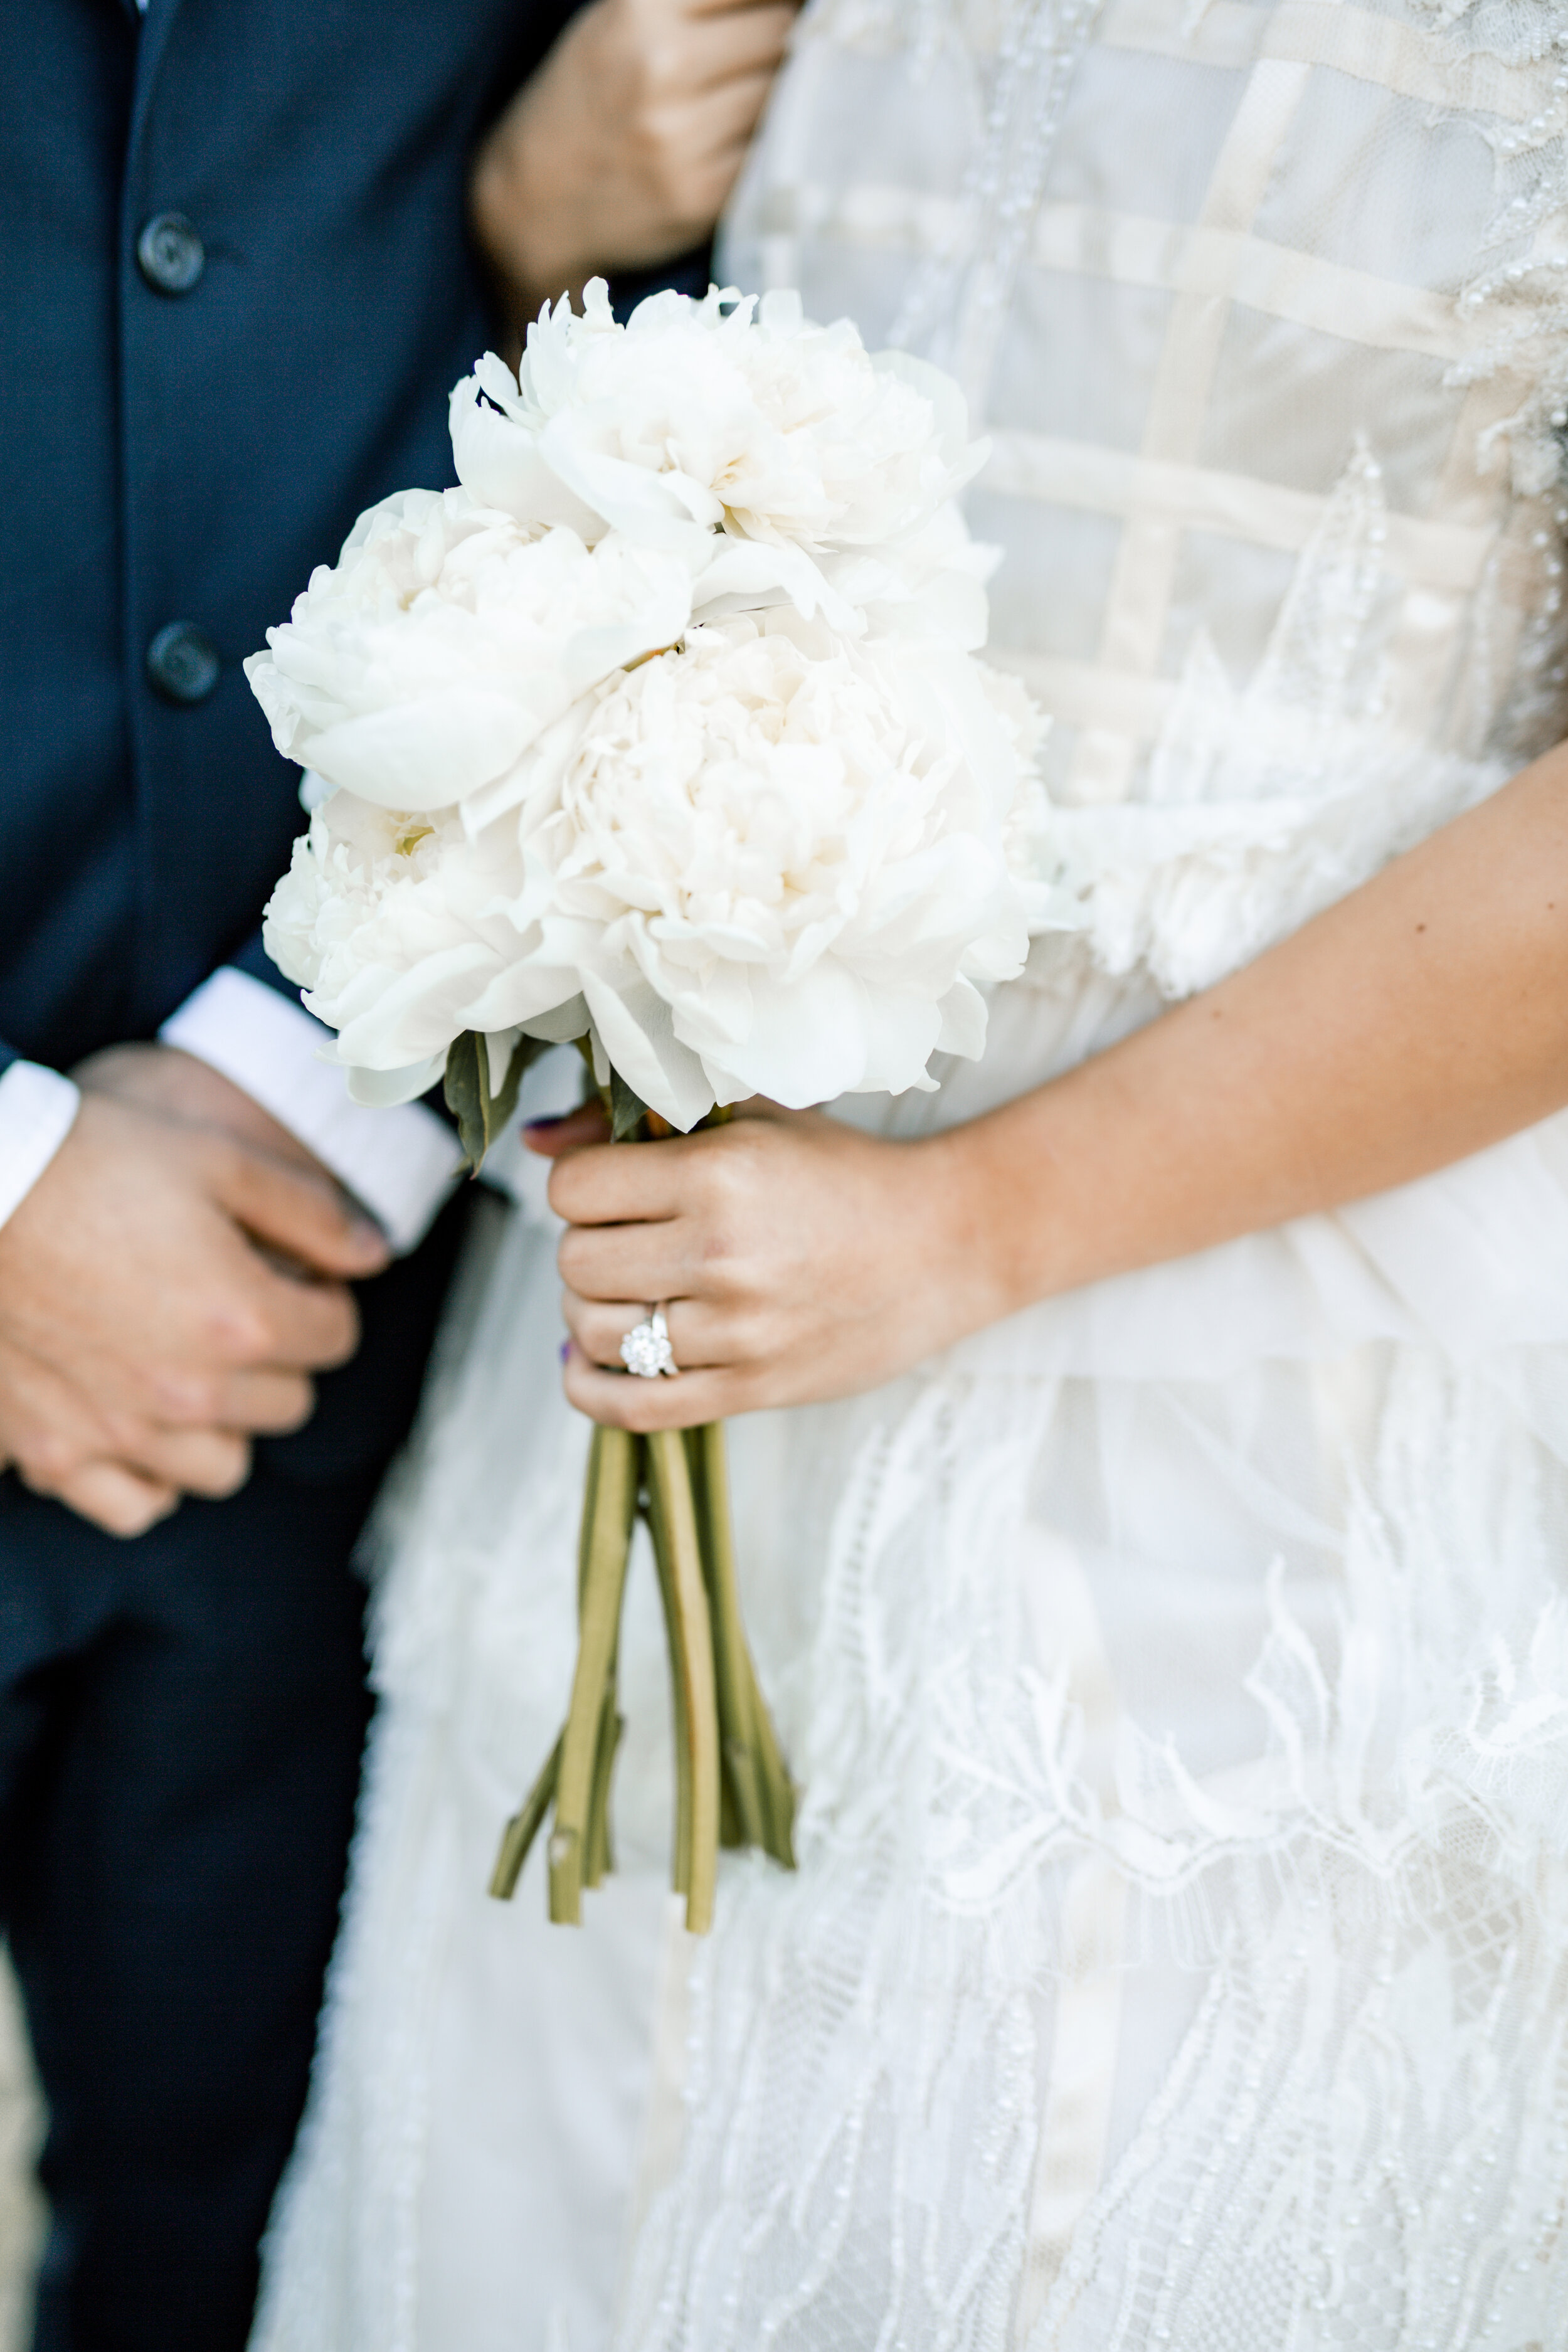 Bride holding Groom's arm and a bridal bouquet